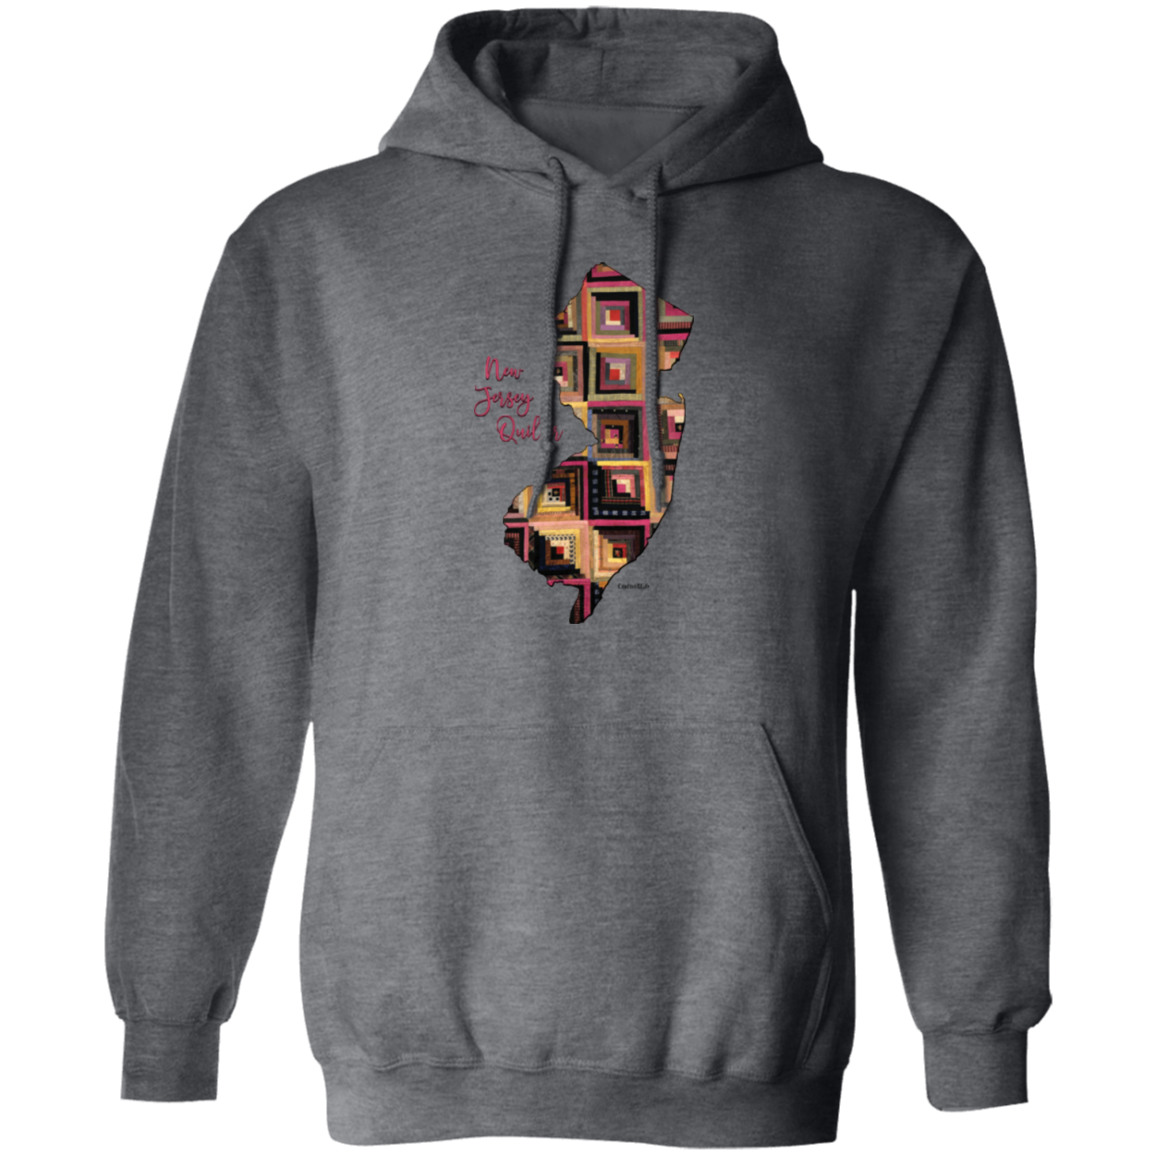 New Jersey Quilter Pullover Hoodie, Gift for Quilting Friends and Family